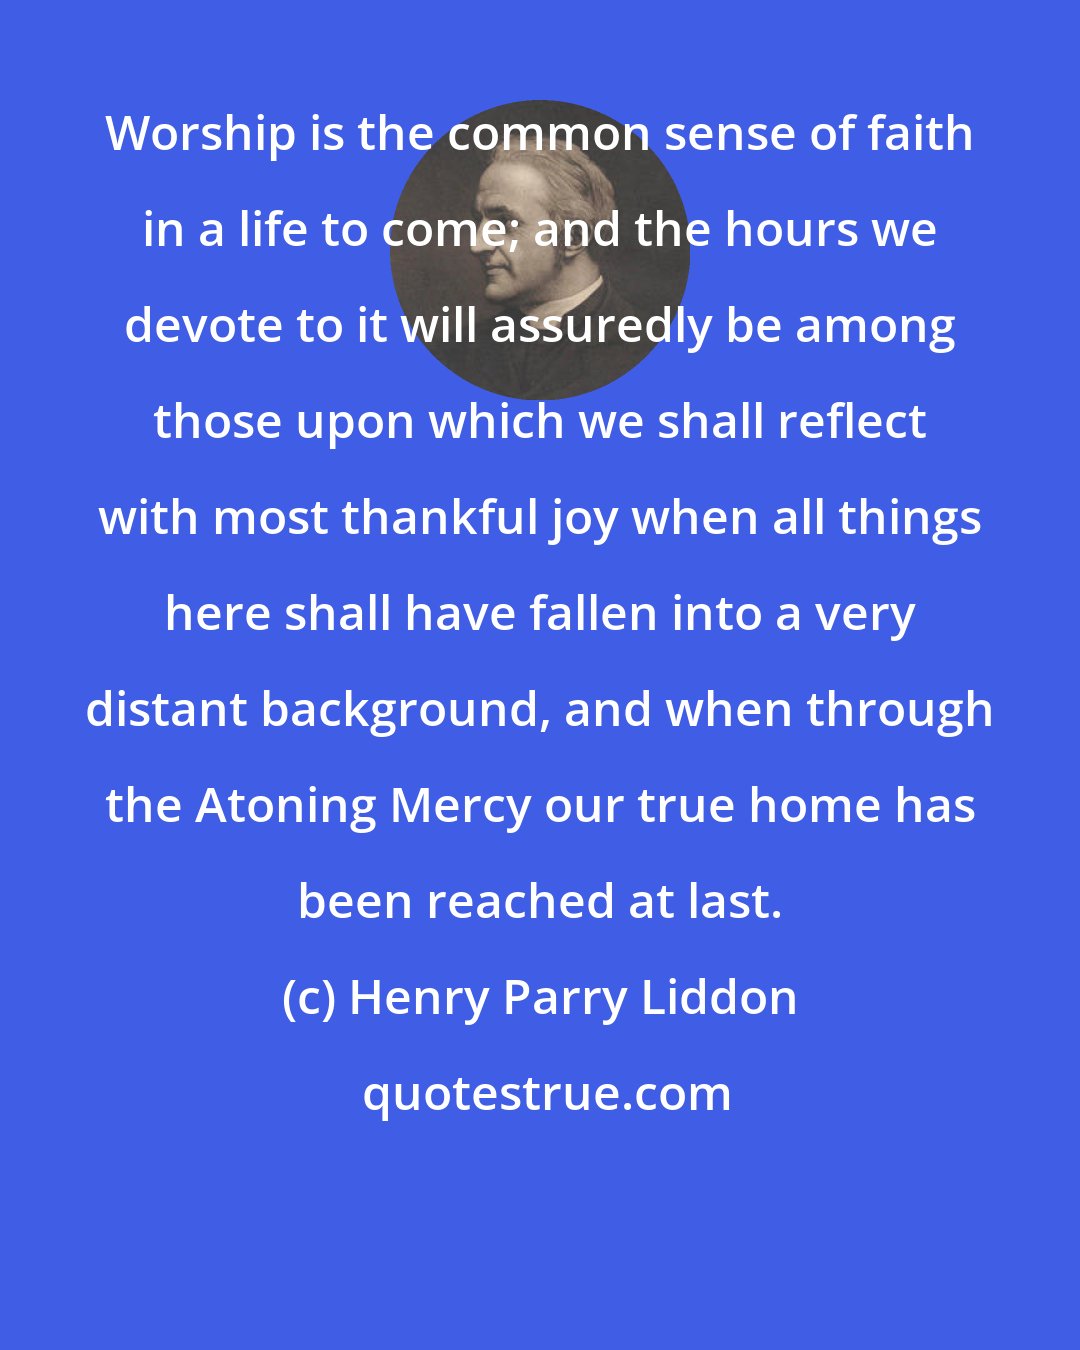 Henry Parry Liddon: Worship is the common sense of faith in a life to come; and the hours we devote to it will assuredly be among those upon which we shall reflect with most thankful joy when all things here shall have fallen into a very distant background, and when through the Atoning Mercy our true home has been reached at last.